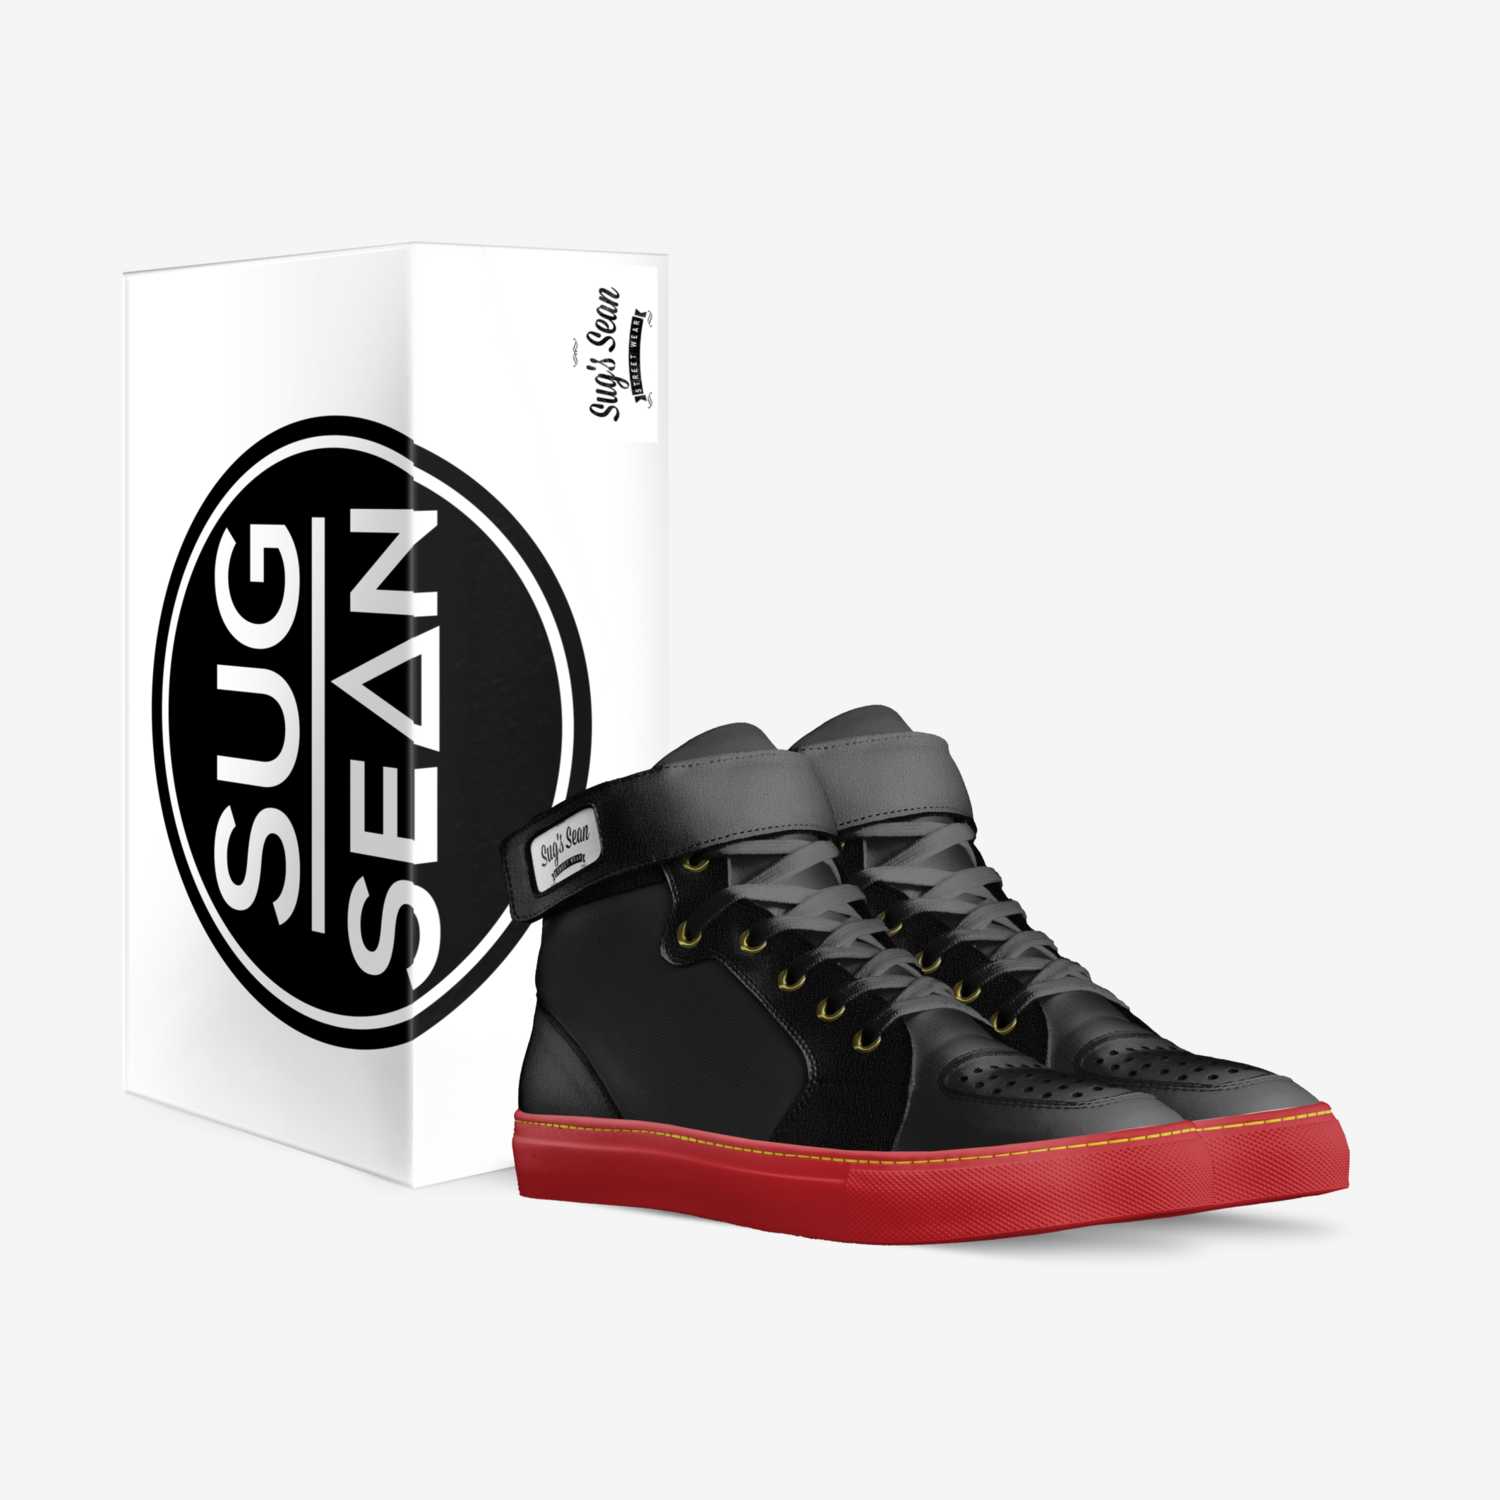 Sug's Sean custom made in Italy shoes by Shawn Webster | Box view